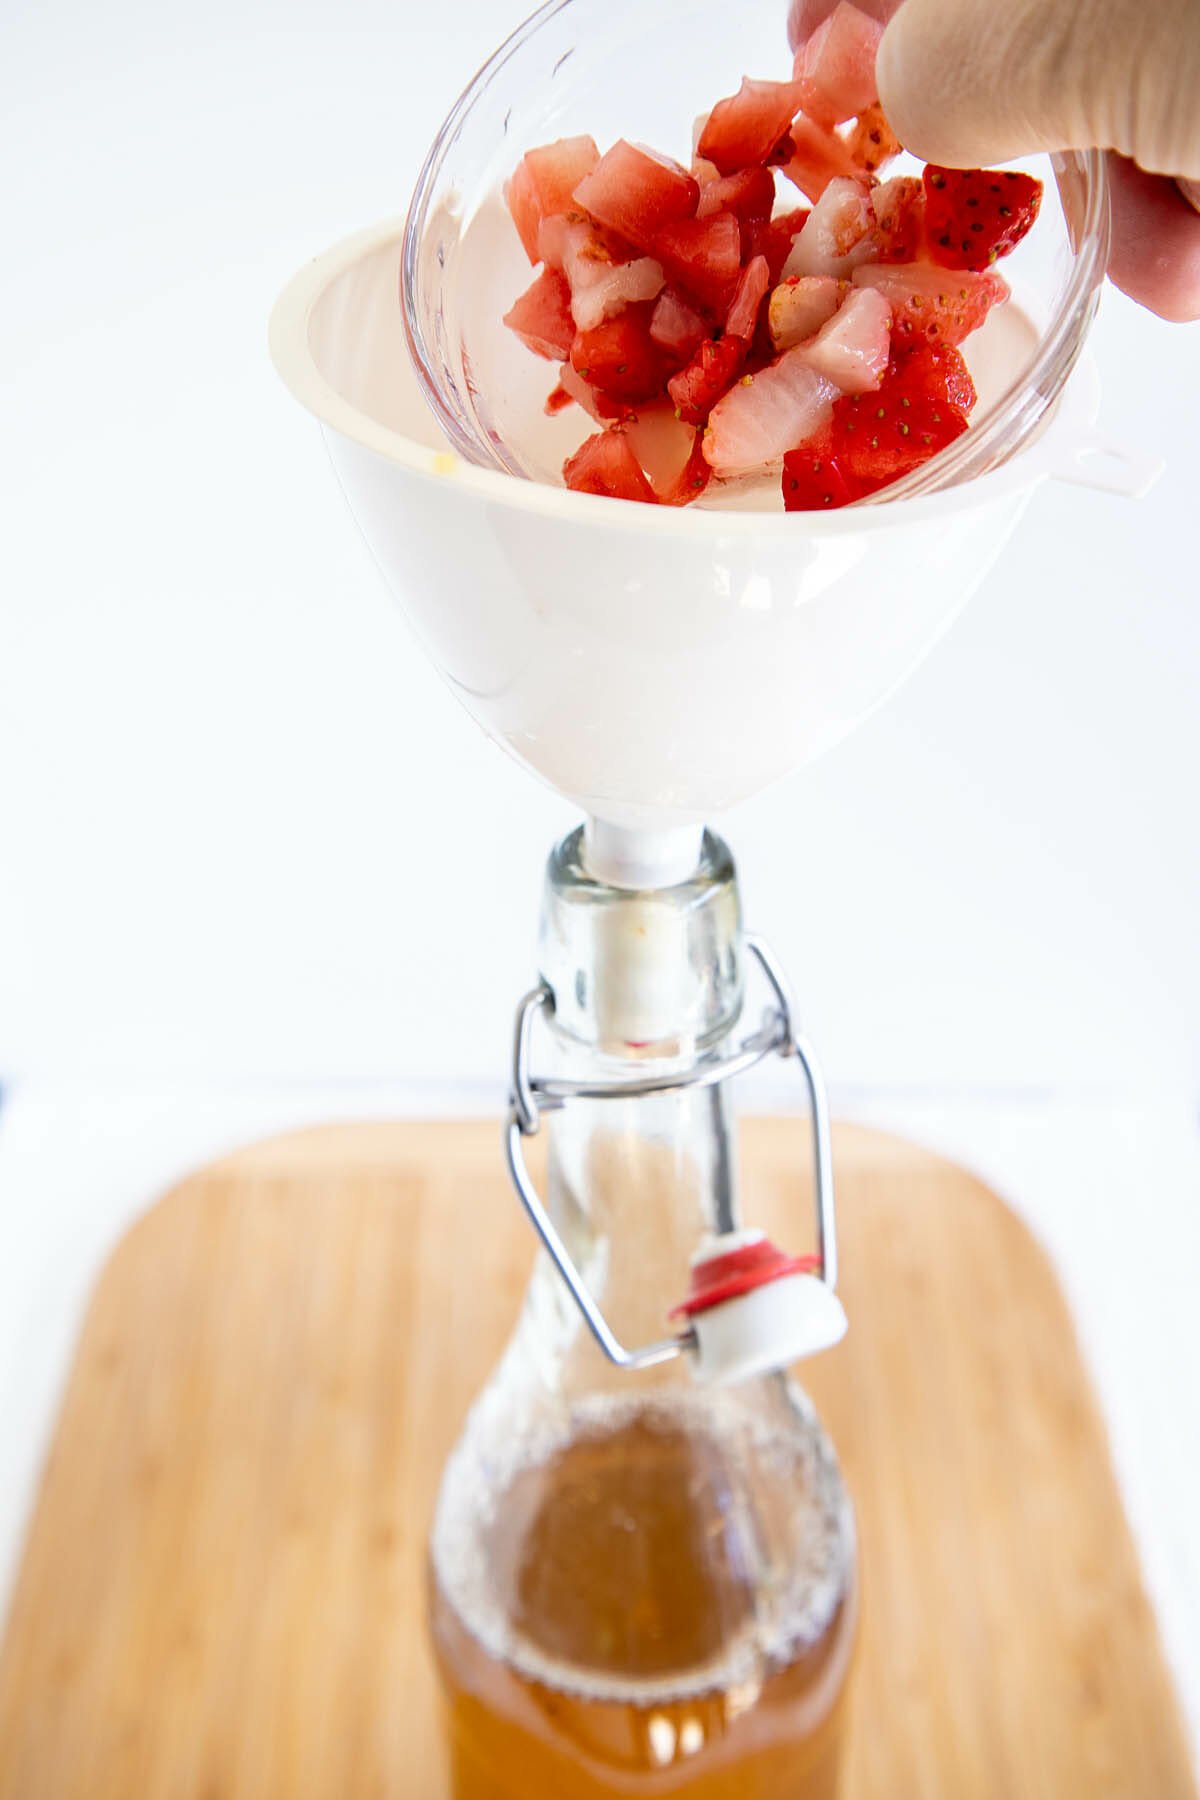 Chopped strawberries being poured into a funnel over a bottle.